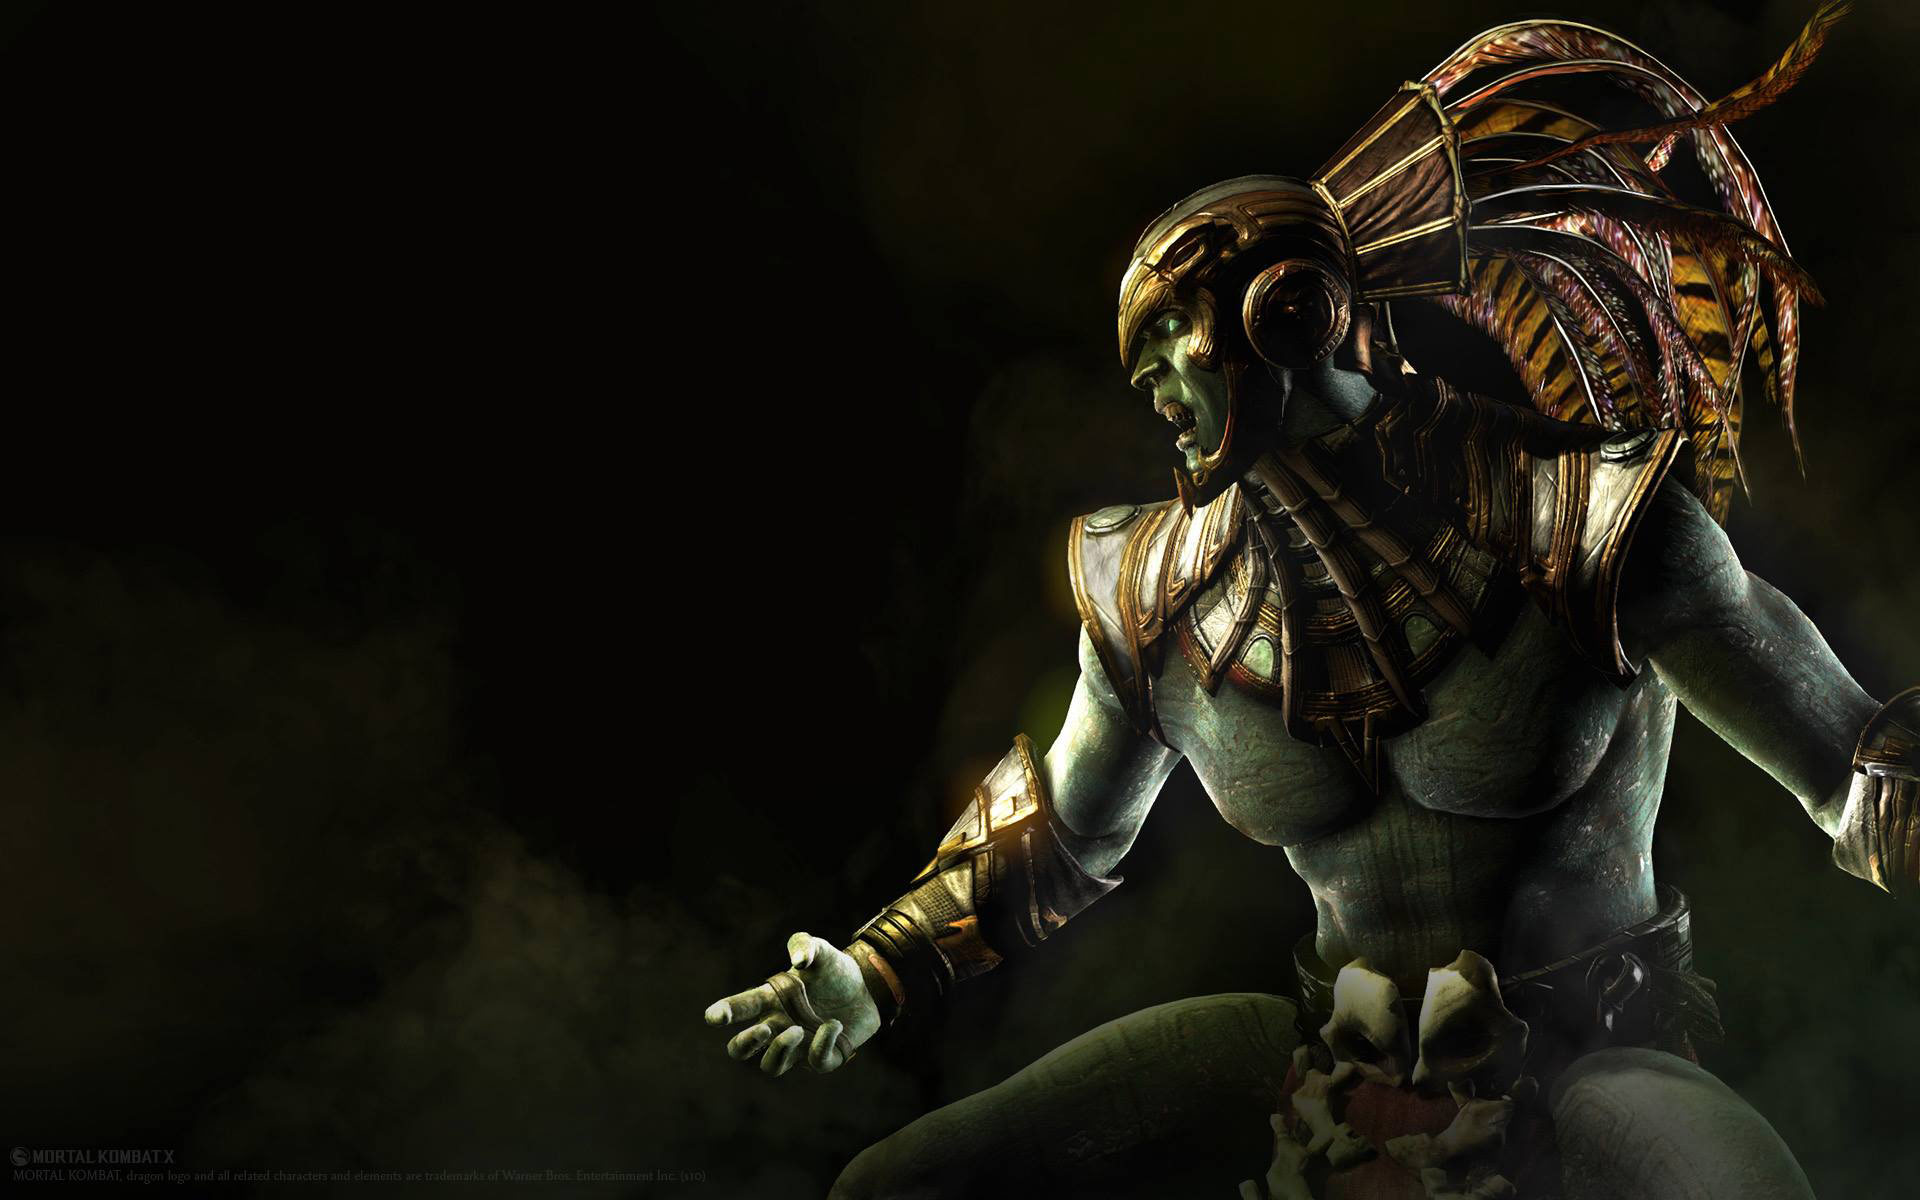 Mortal Kombat X Wallpaper Featuring Old New Characters Image